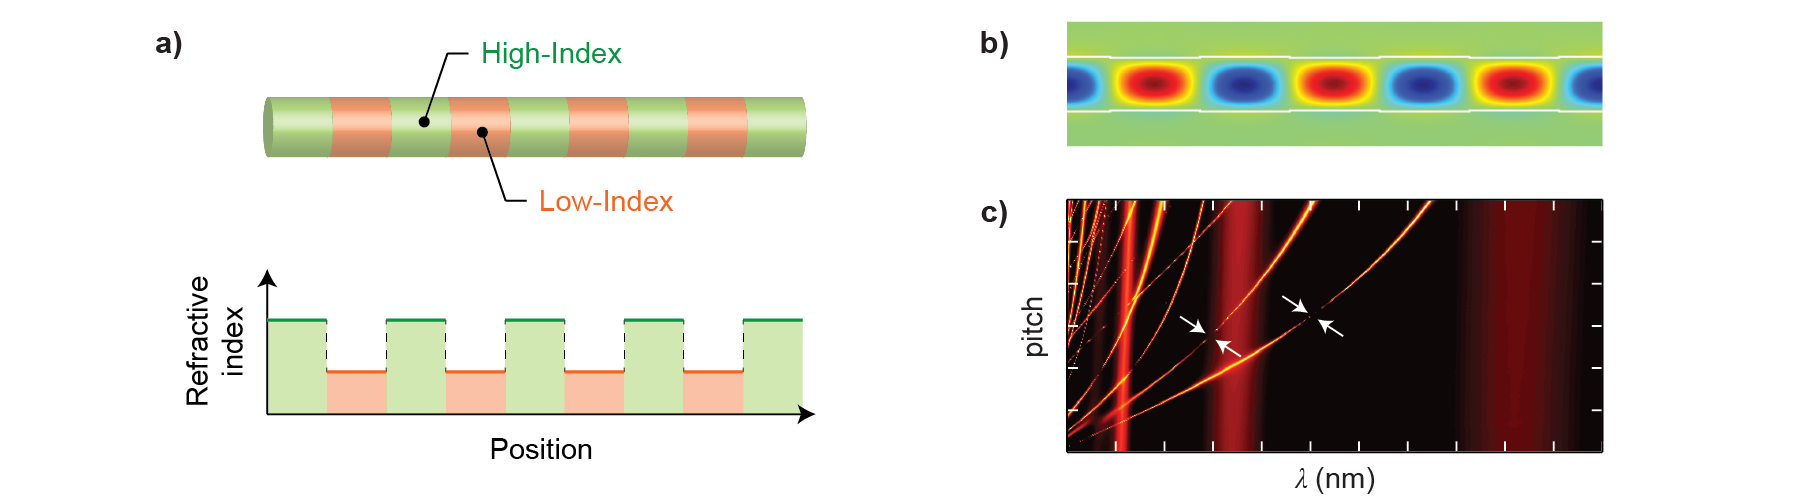 Figure 2. (a) Design of an index-modulated NW superlattice, (b) mode pattern of a guided resonance, and (c) a confined-energy heatmap showing optical BICs.